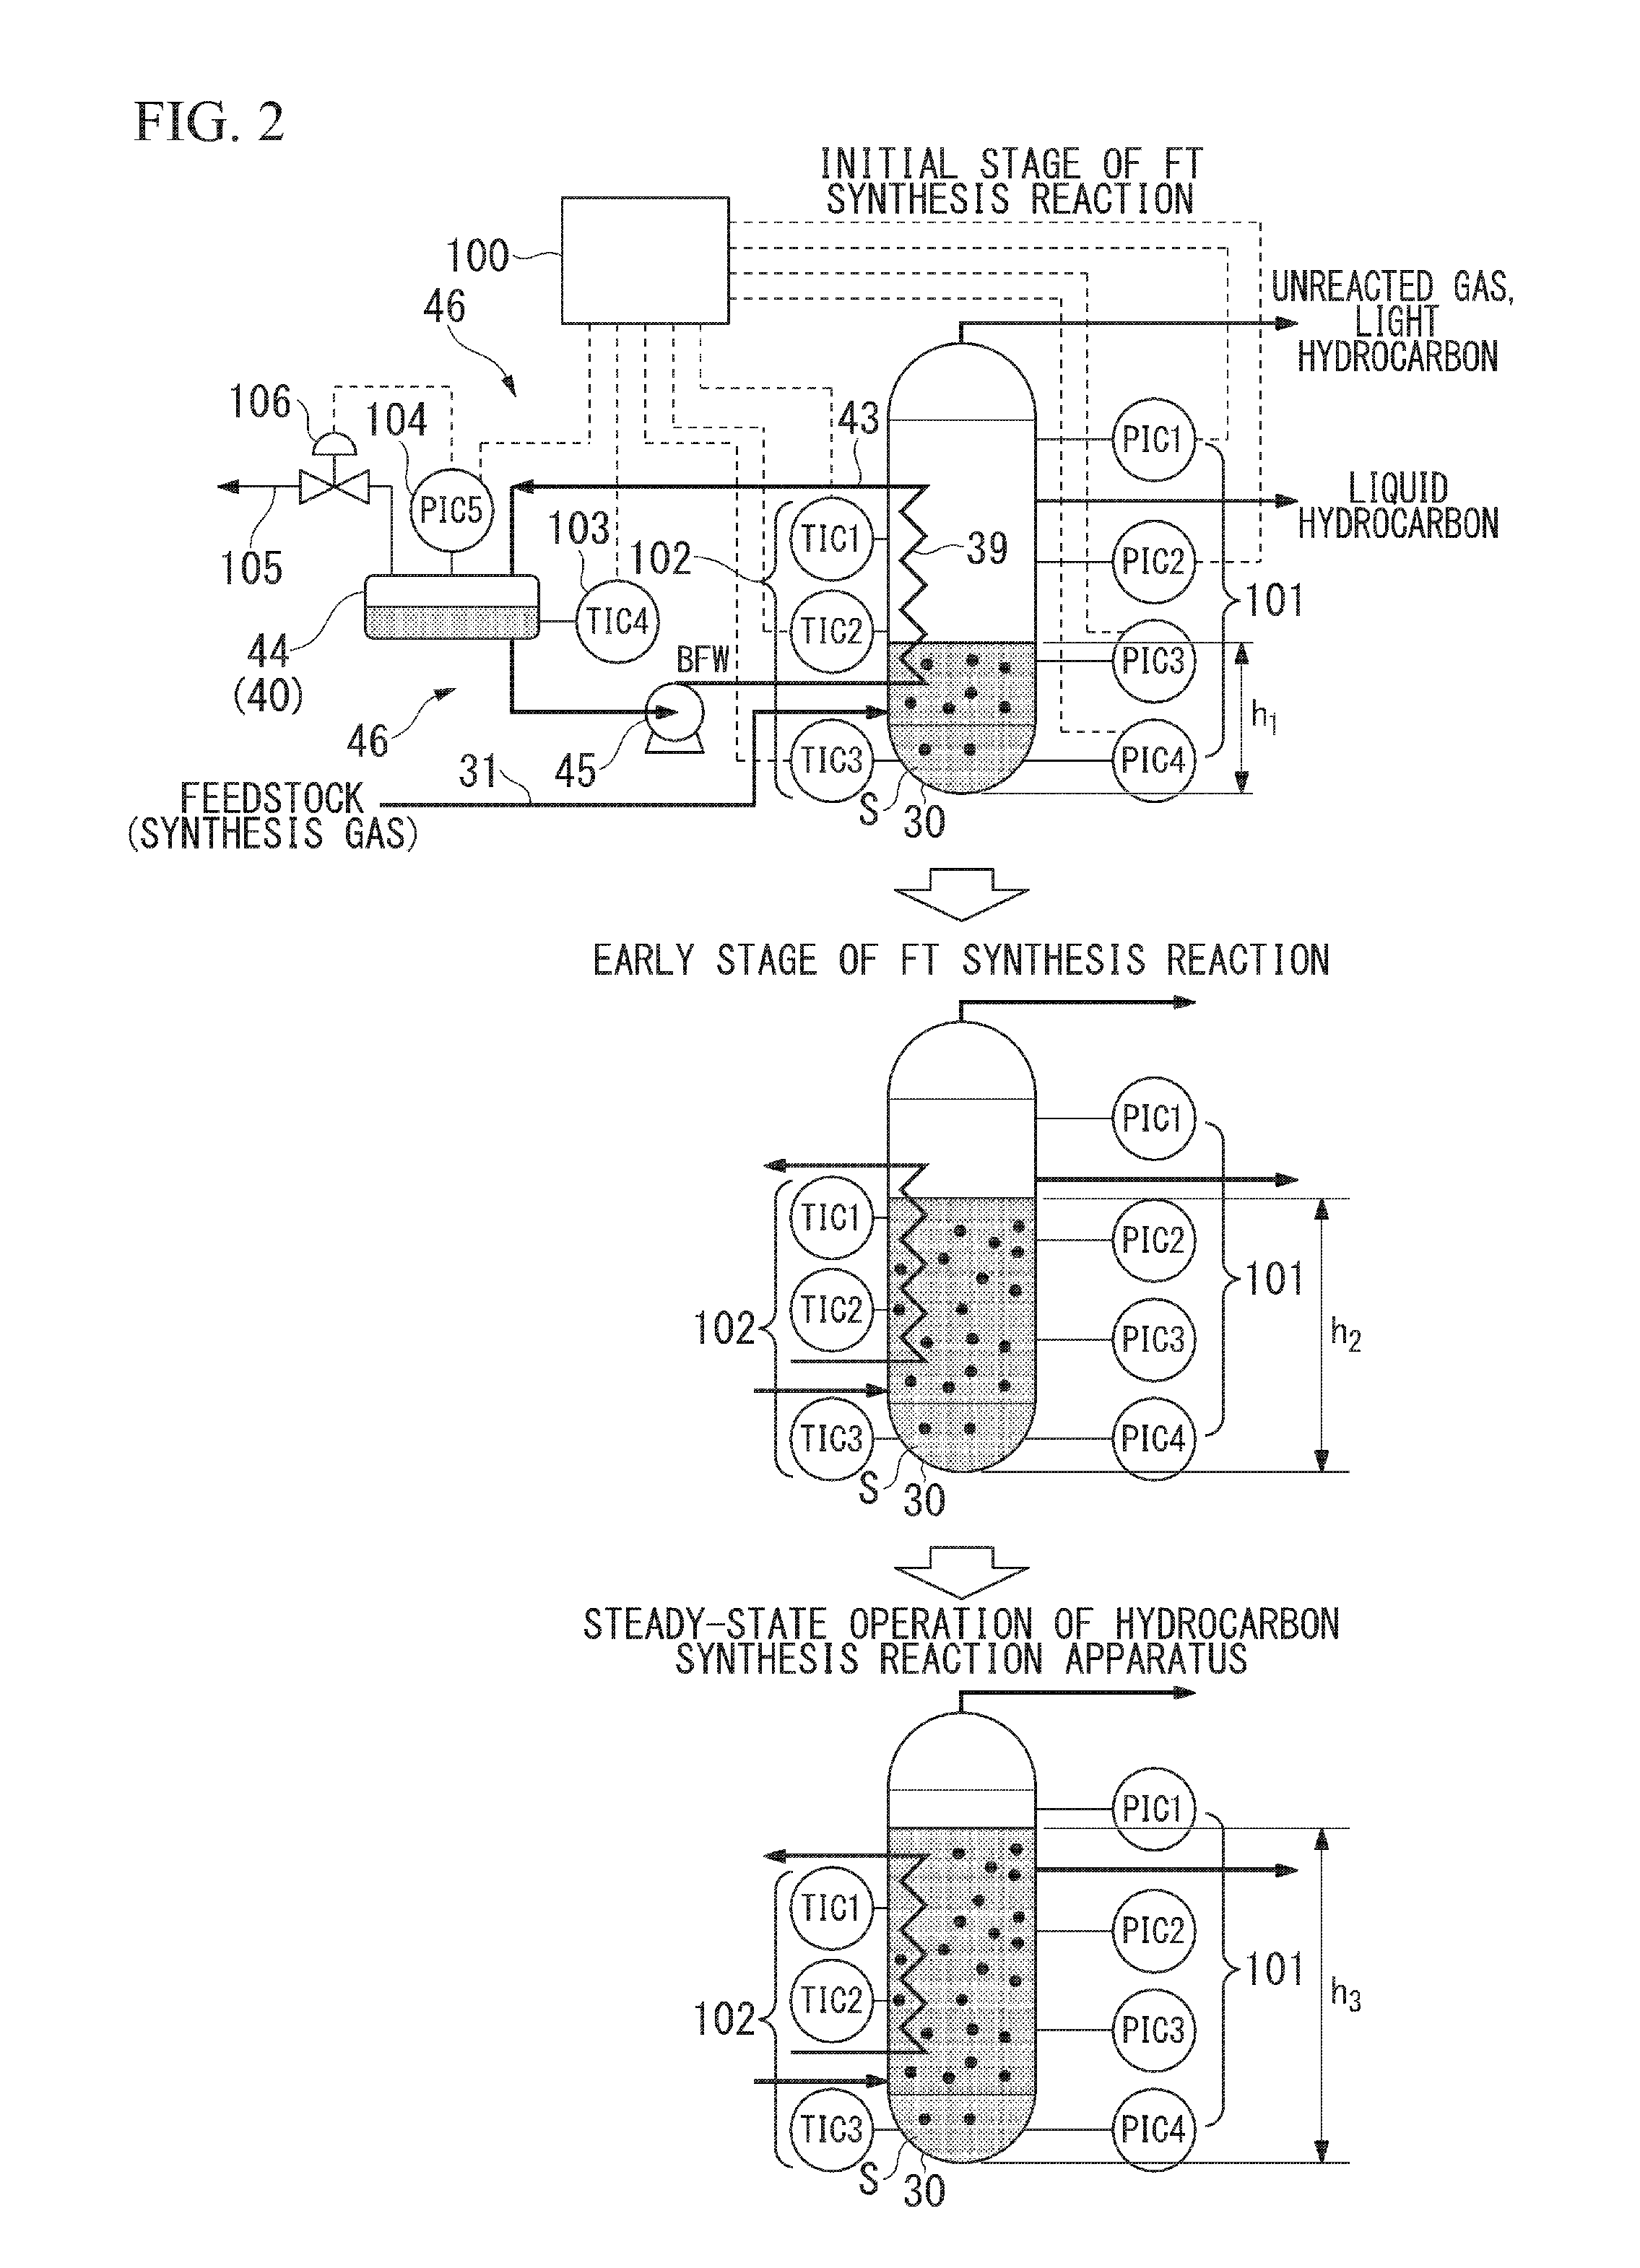 Start-up method of hydrocarbon synthesis reaction apparatus